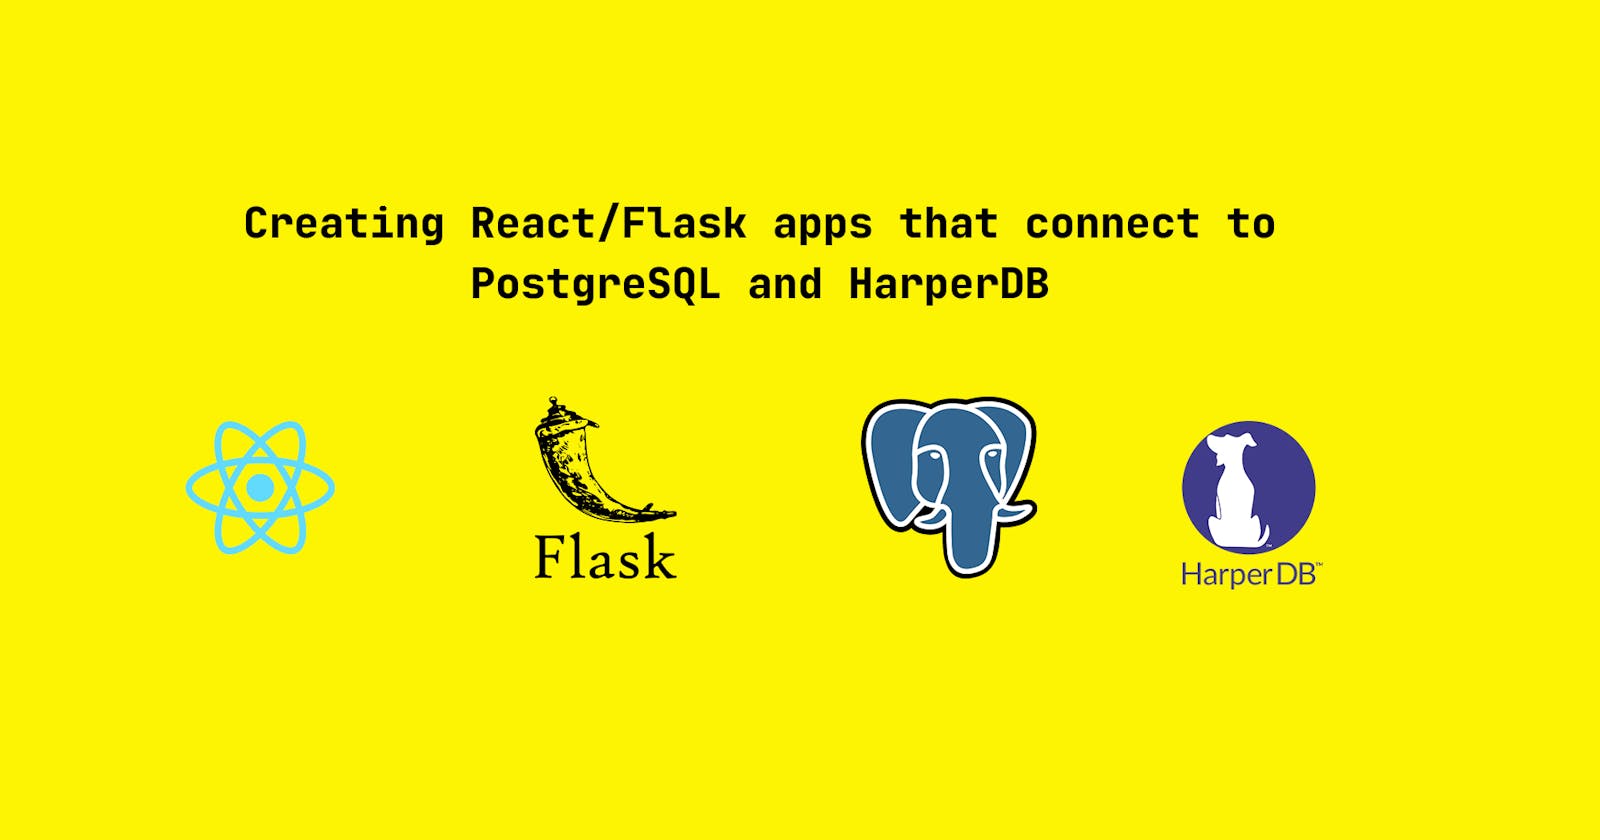 Creating React/Flask apps that connect to PostgreSQL and HarperDB